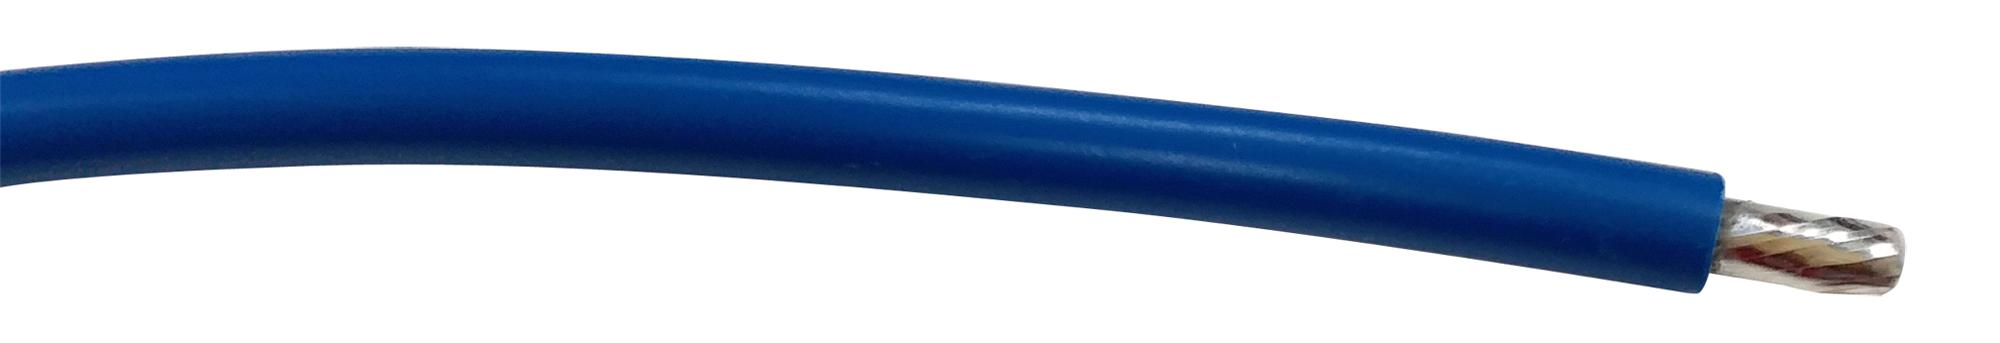 PP002533 CABLE WIRE, 22AWG, BLUE, 305M PRO POWER